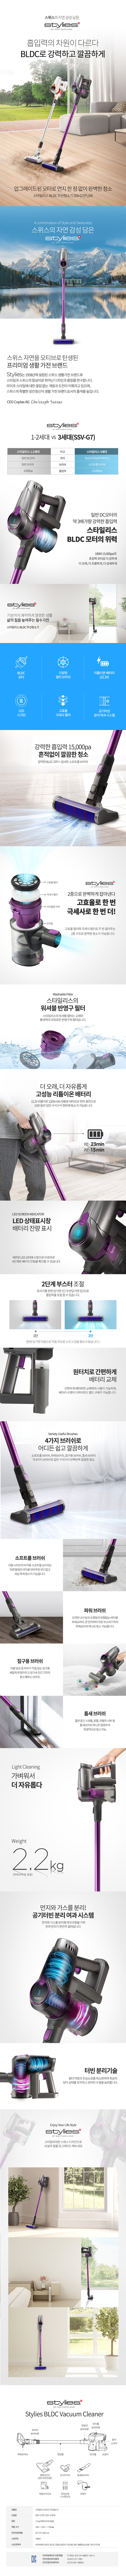 stylies G7 vacuum cleaner